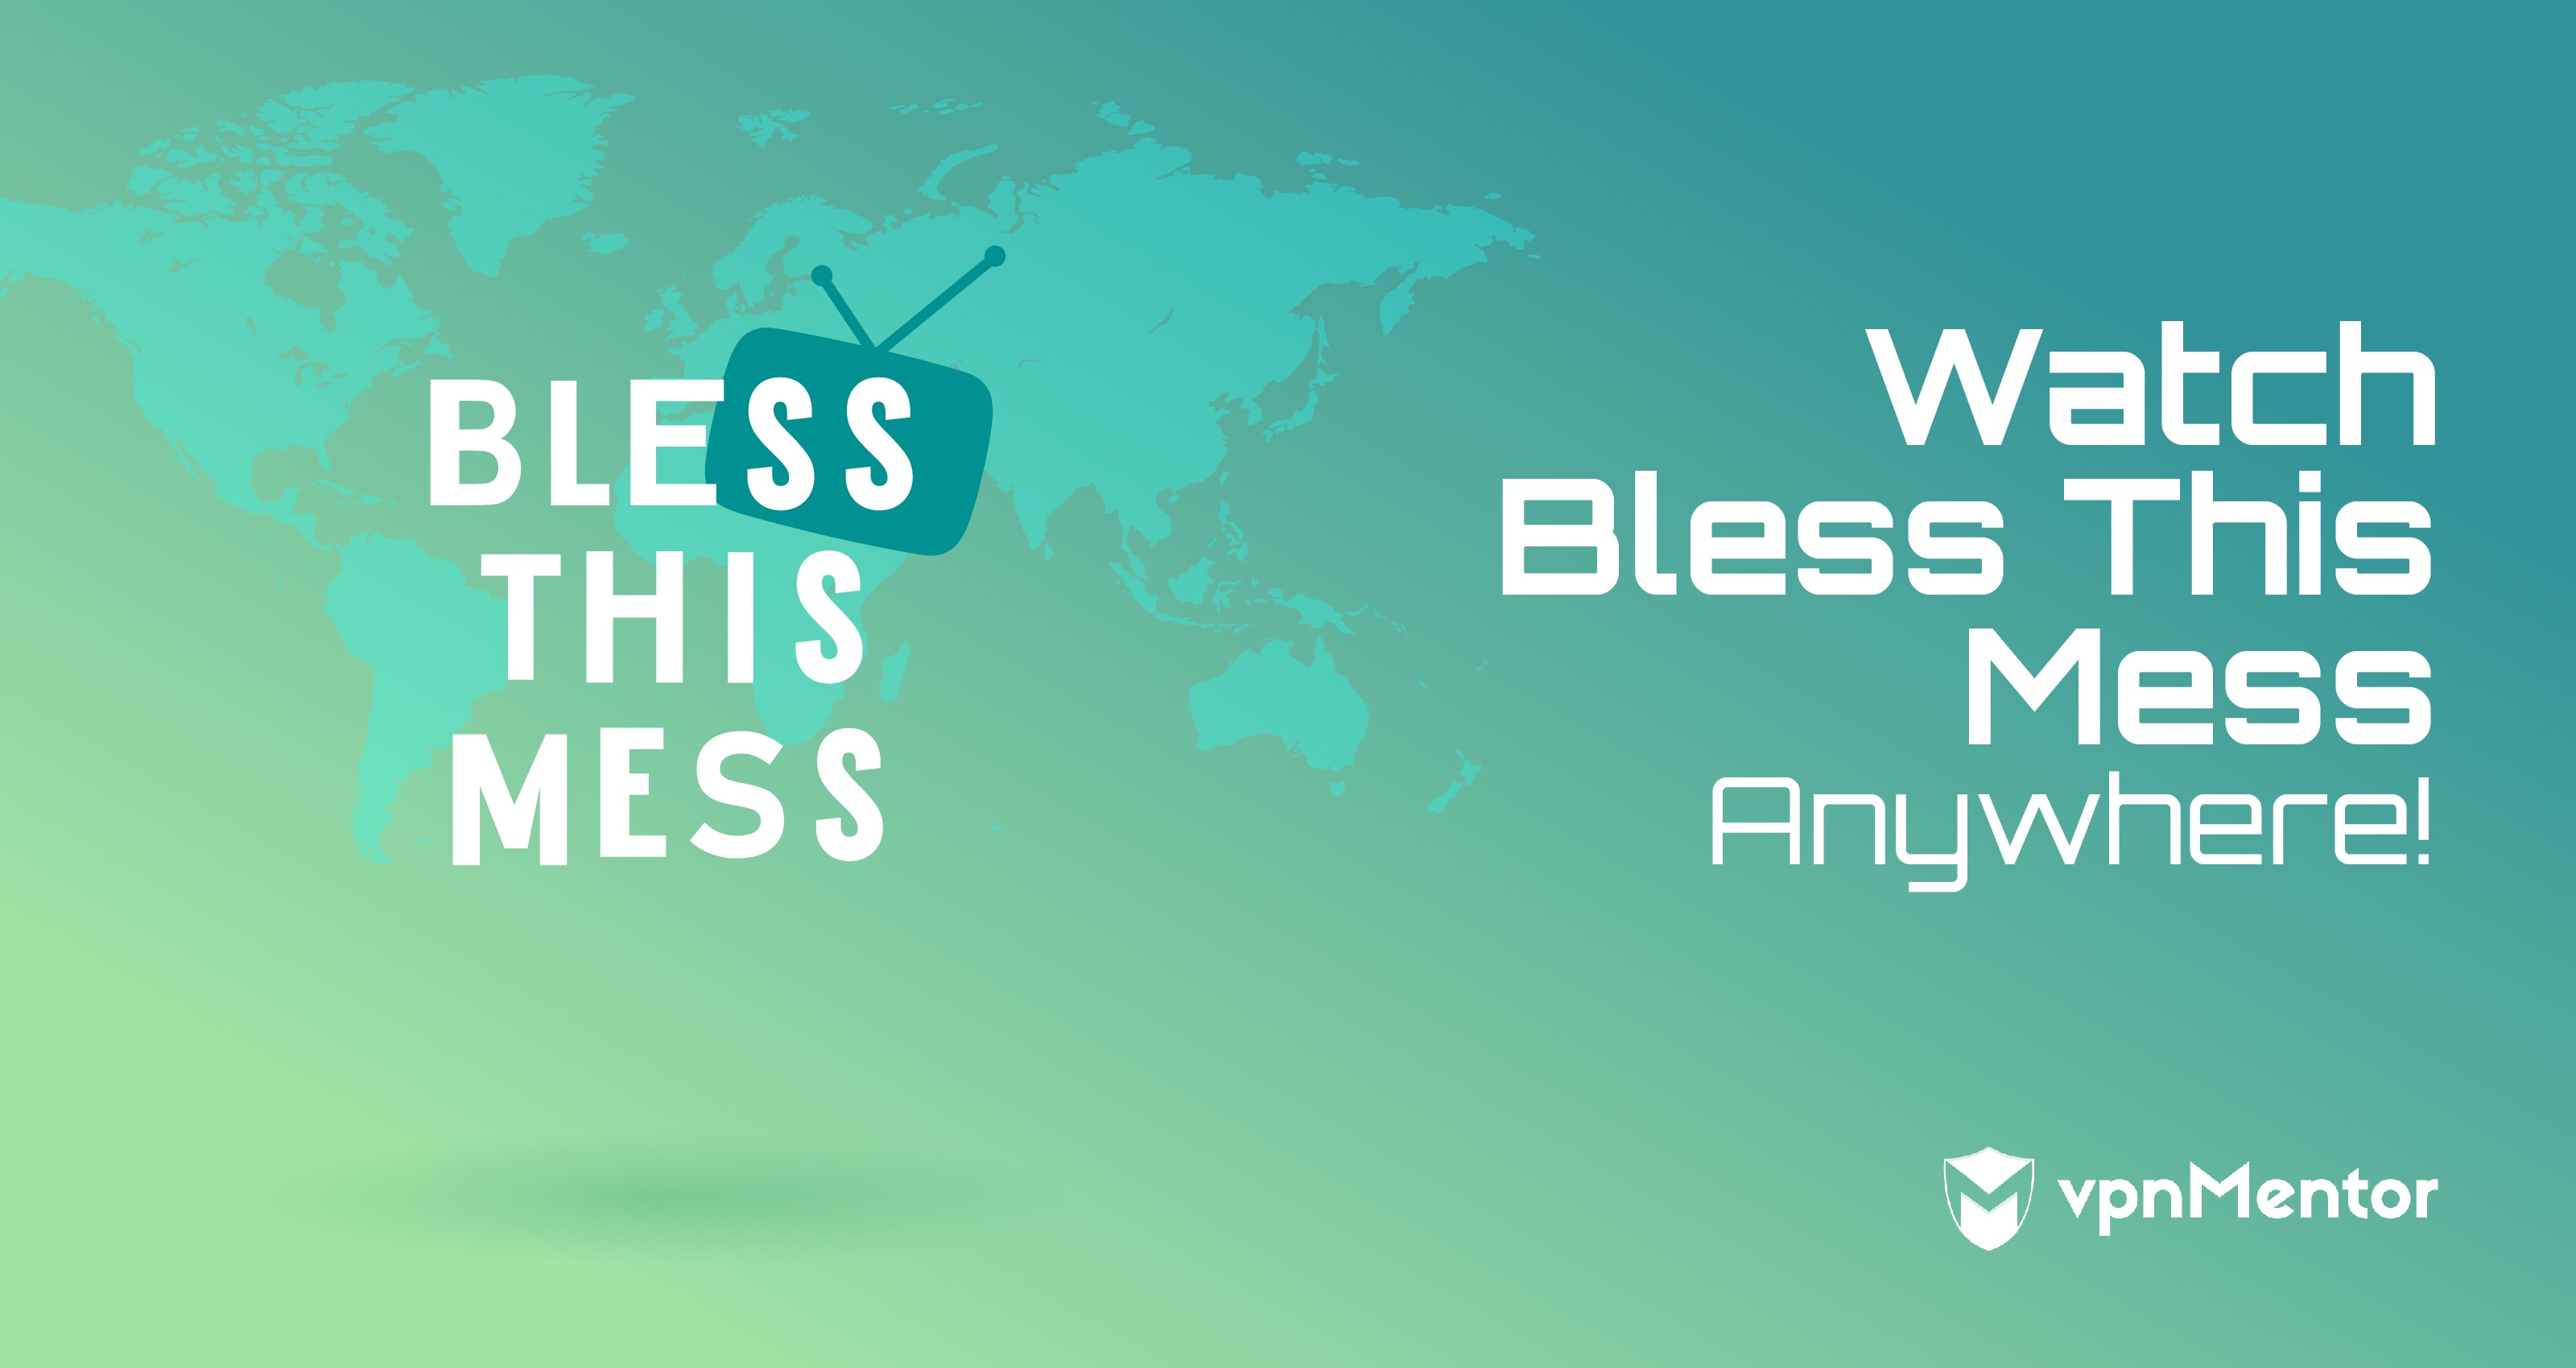 Watch Bless This Mess Season 2 Anywhere | Updated January 2022